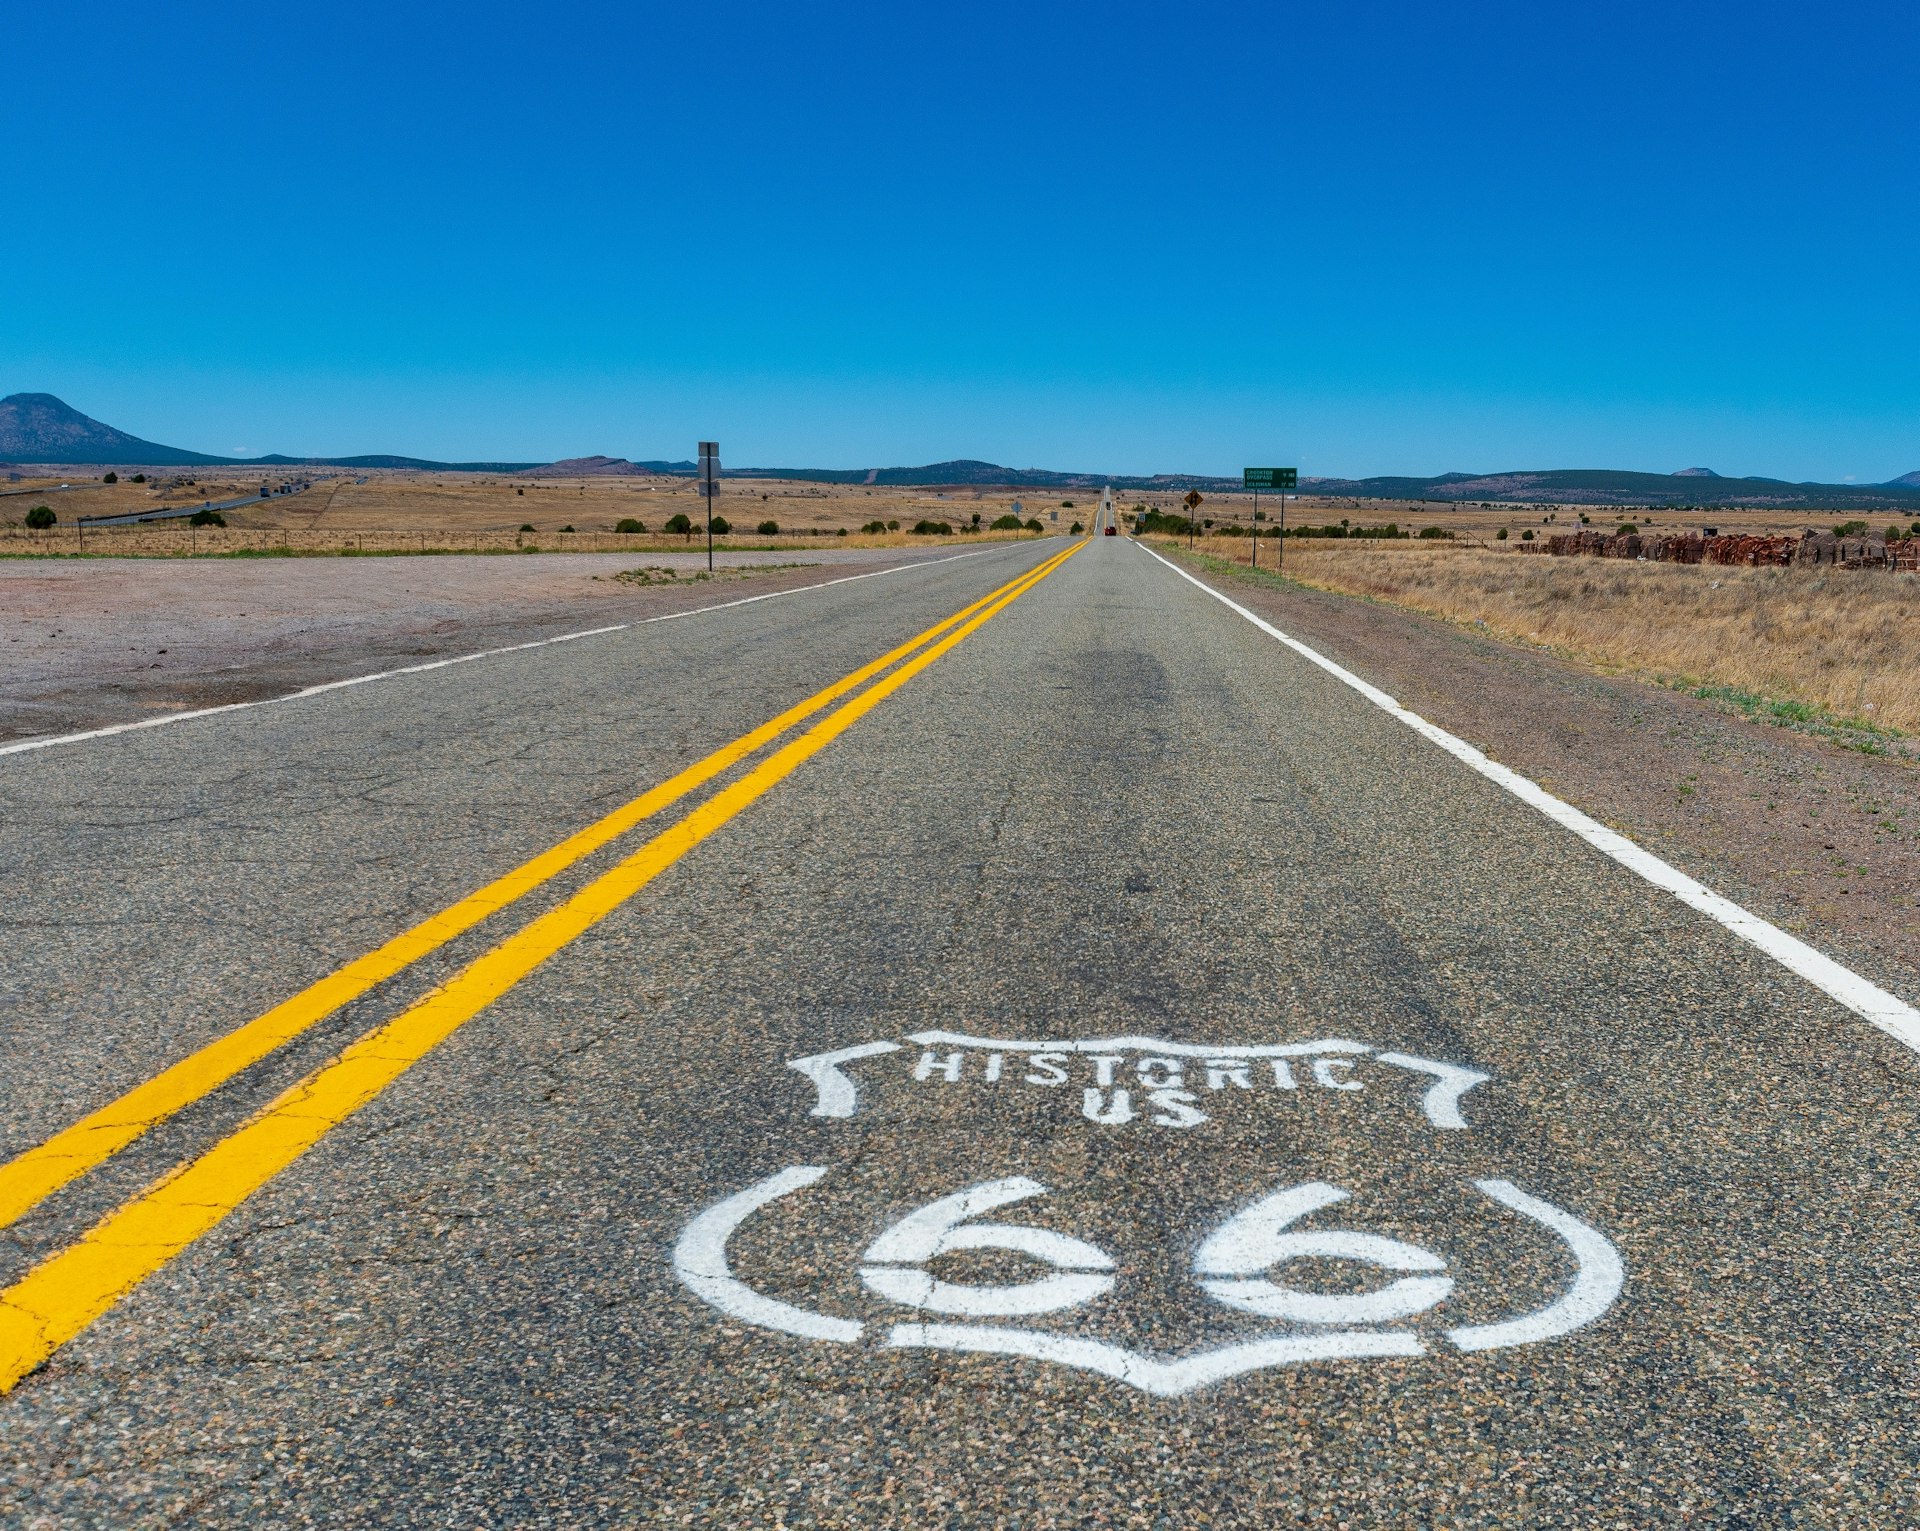 The logo of route 66 painted on a black road